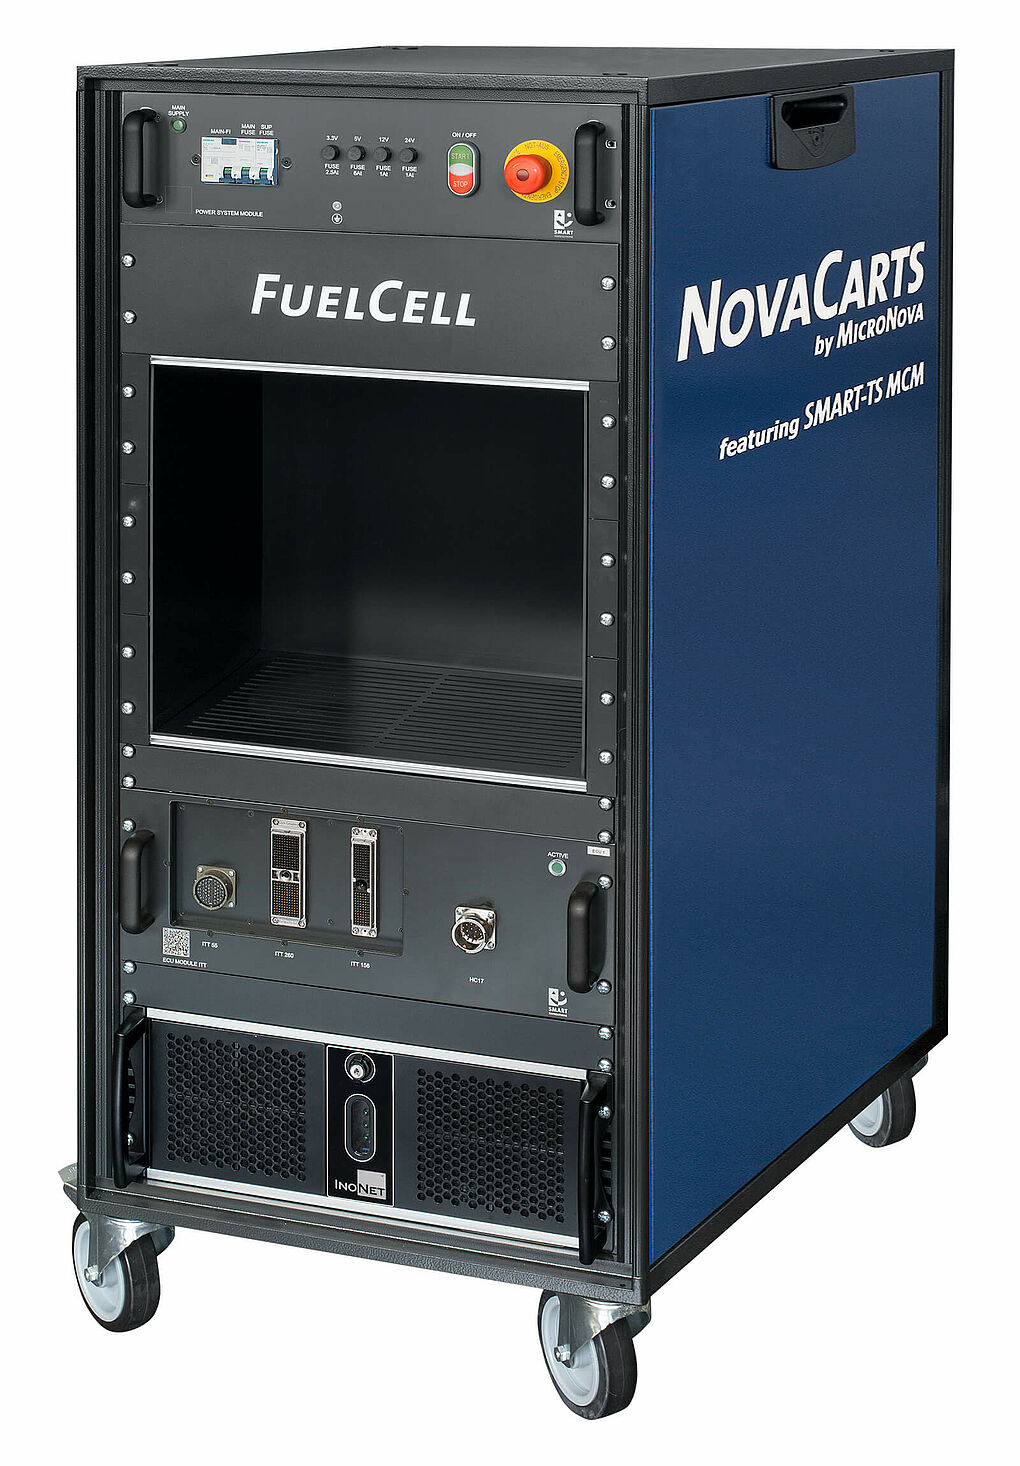 FuelCell HiL MicroNova-SMART TESTSOLUTIONS